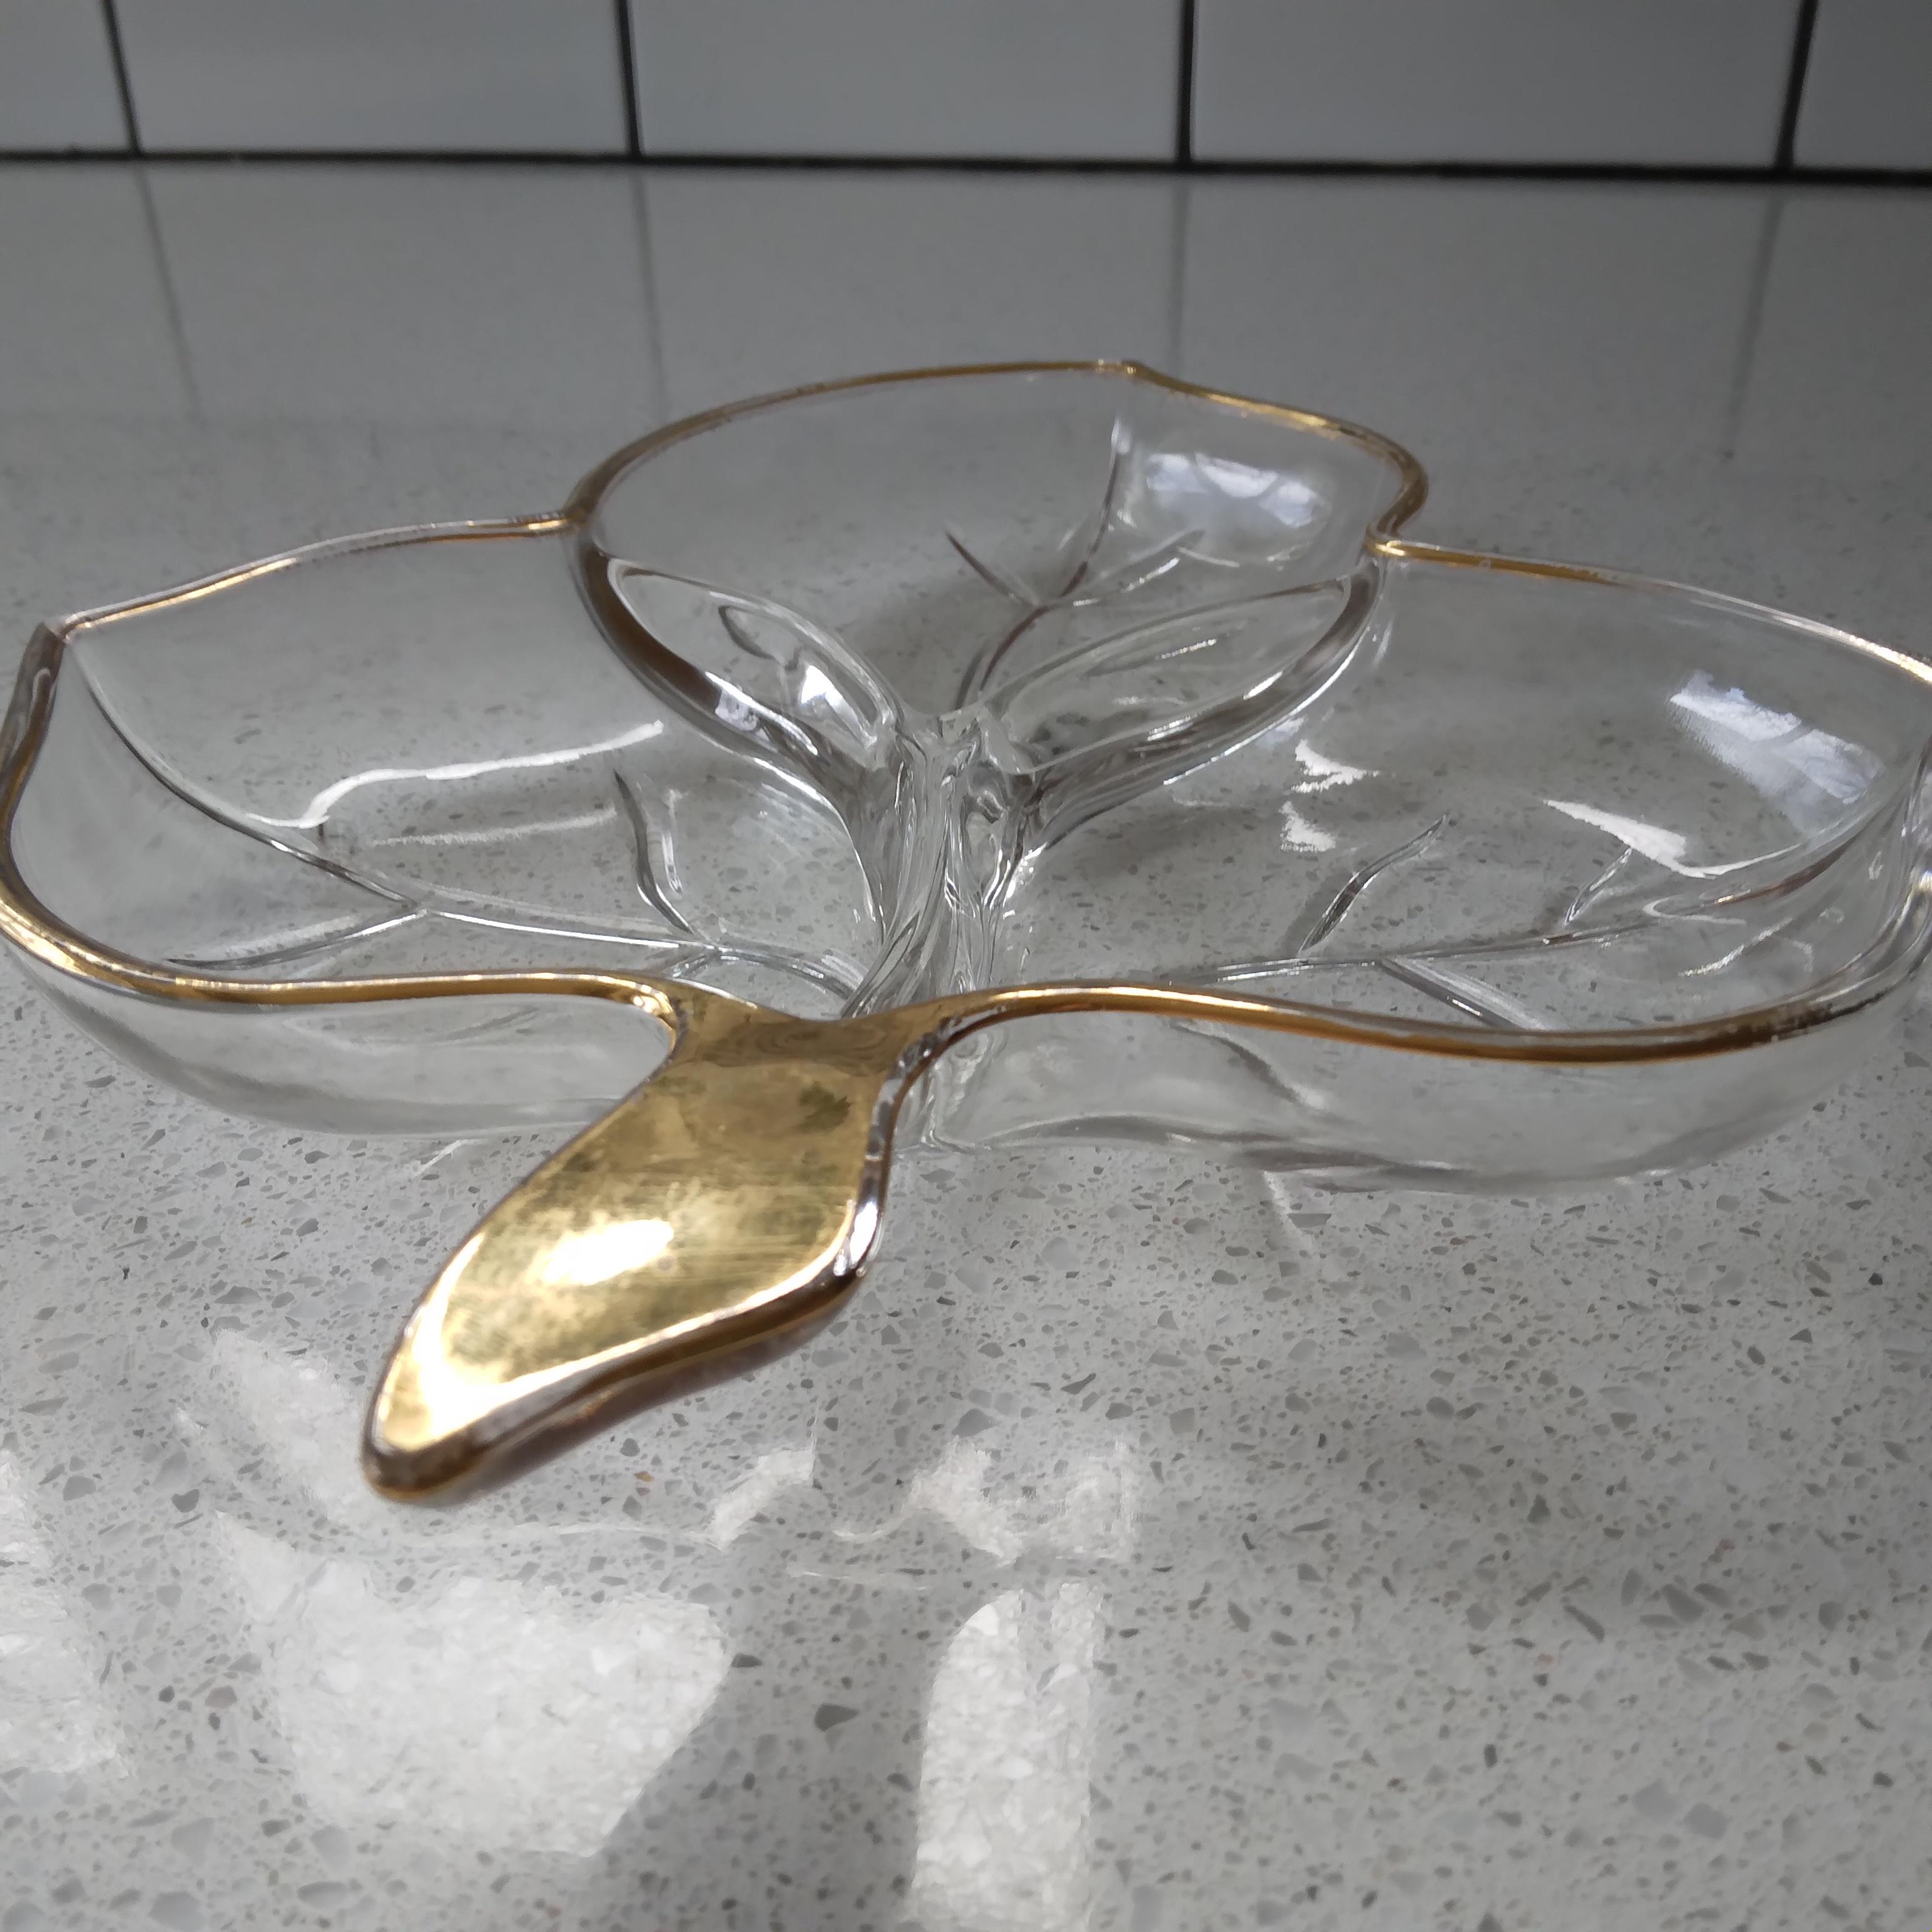 Natural leaf shape in a clear glass medium. We love the gold rimmed edge and stem. The three separate sections are decorated with a delicate vein in clear glass. This vintage piece would be a great addition to your dinnerware collection!

Minor